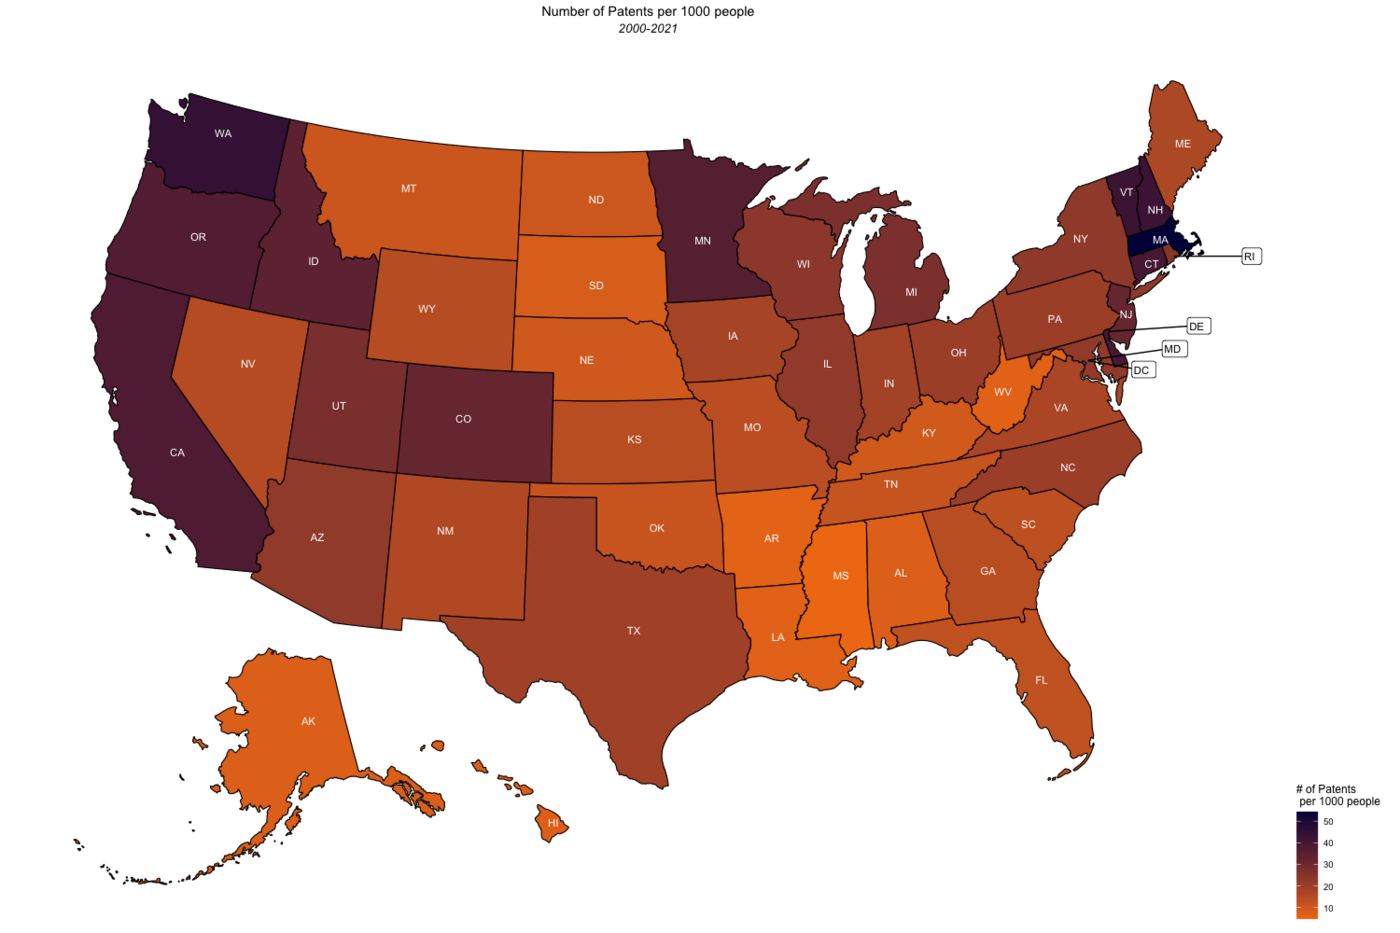 map with a color gradient showing density of patents per inventor per 1,000 people in each U.S. state